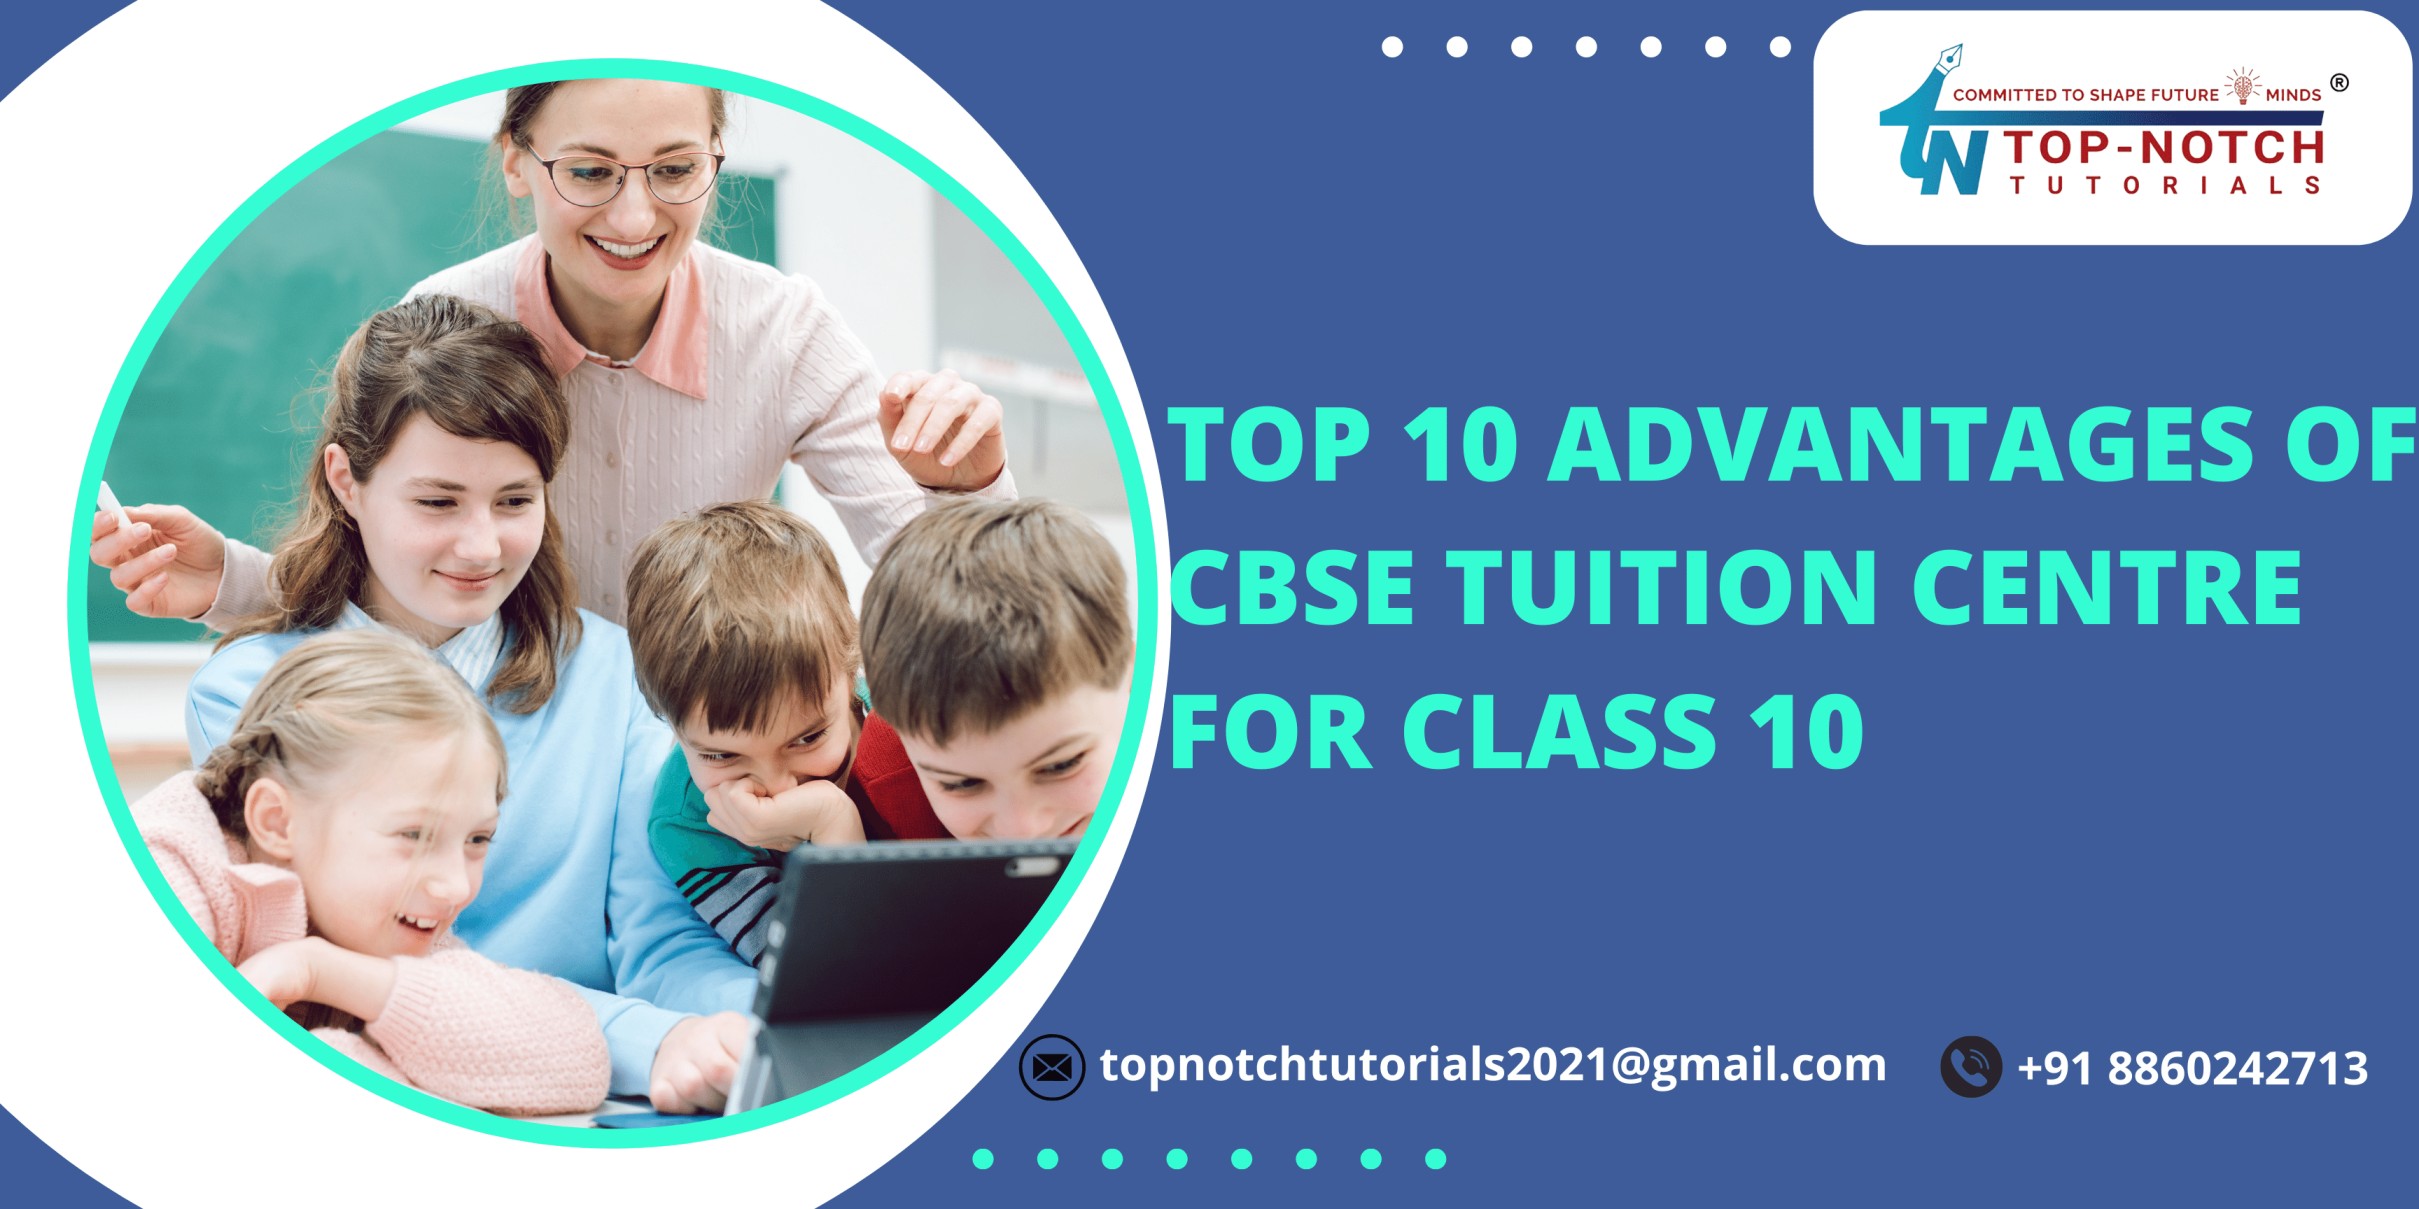 Top 10 Advantages of CBSE Tuition Centre for Class 10